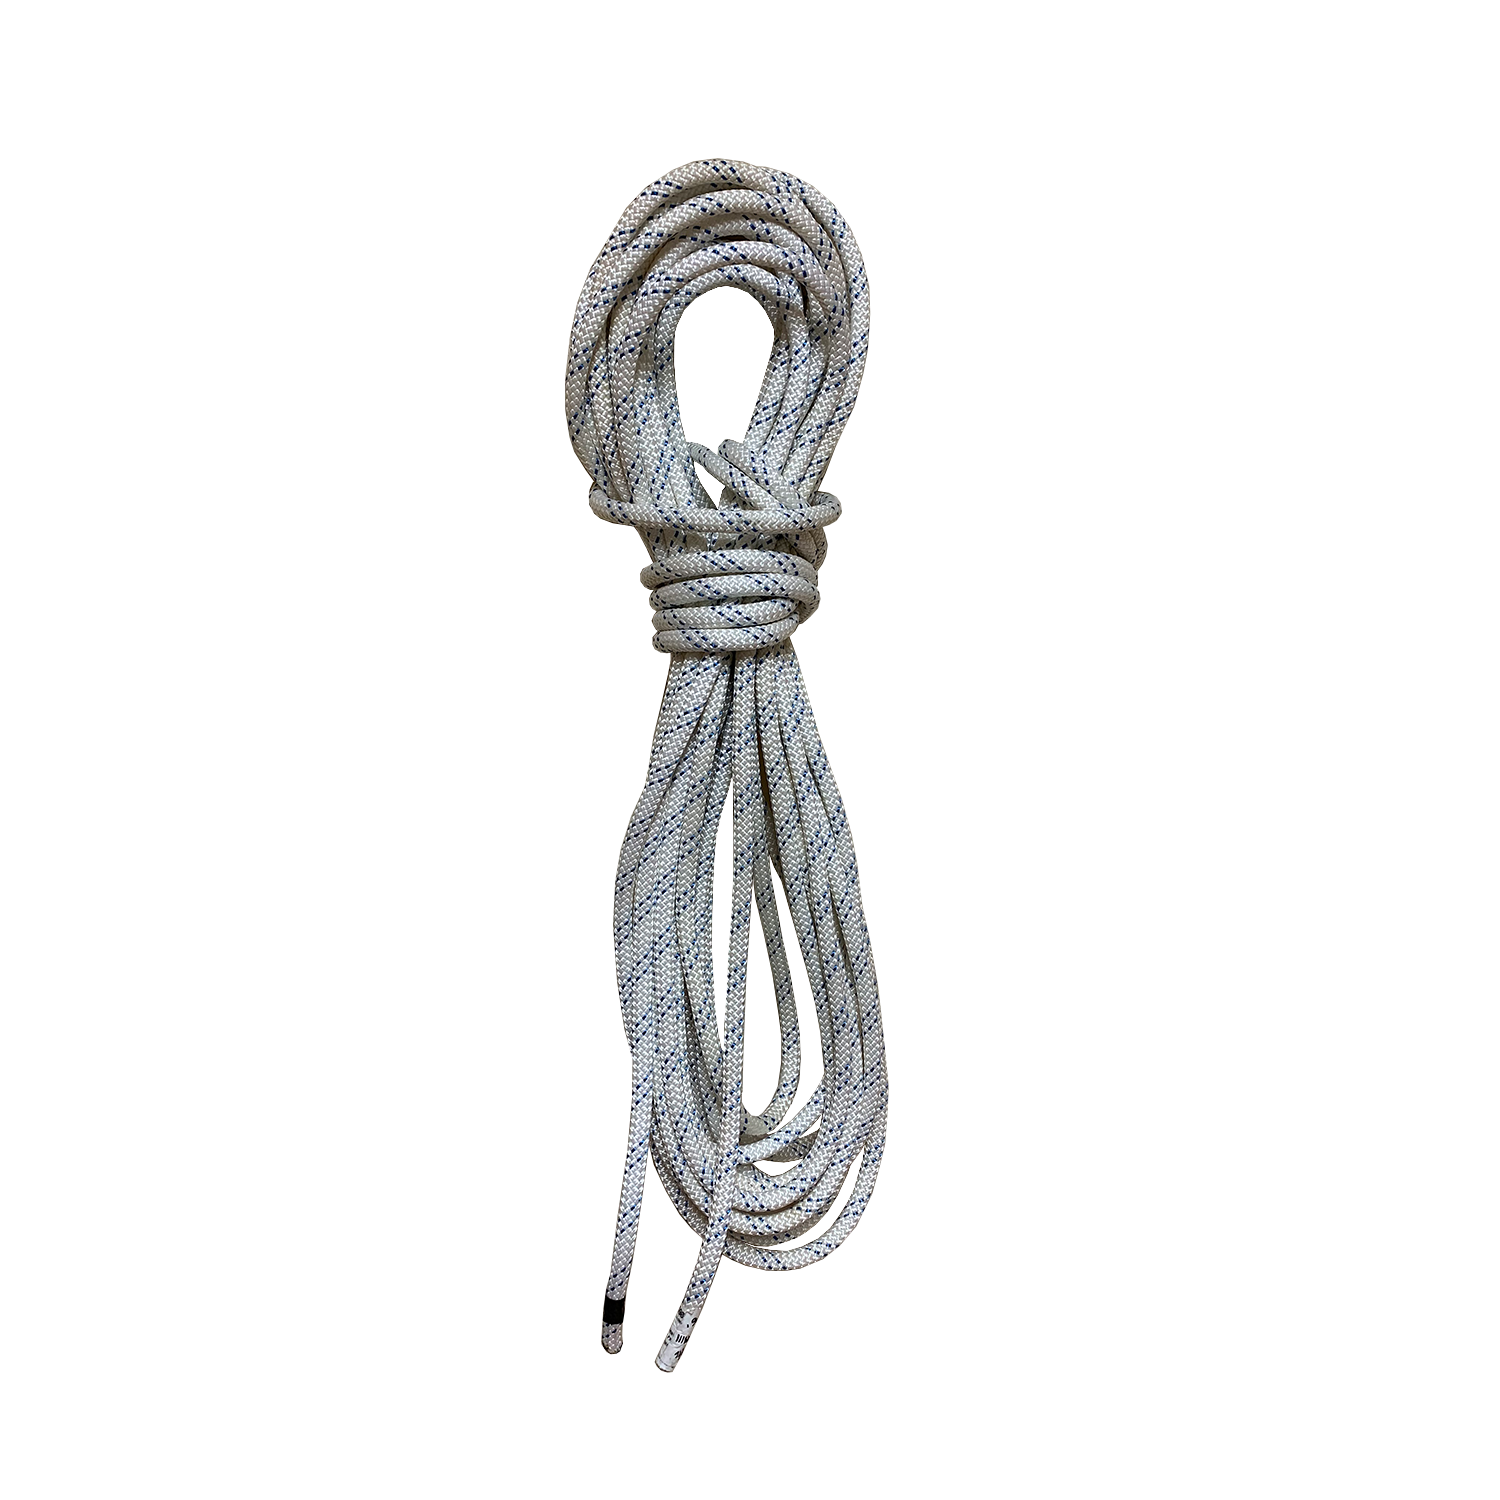 x 40' Kernmantle Static Line 11mm NEW 7/16" Climbing Rope 